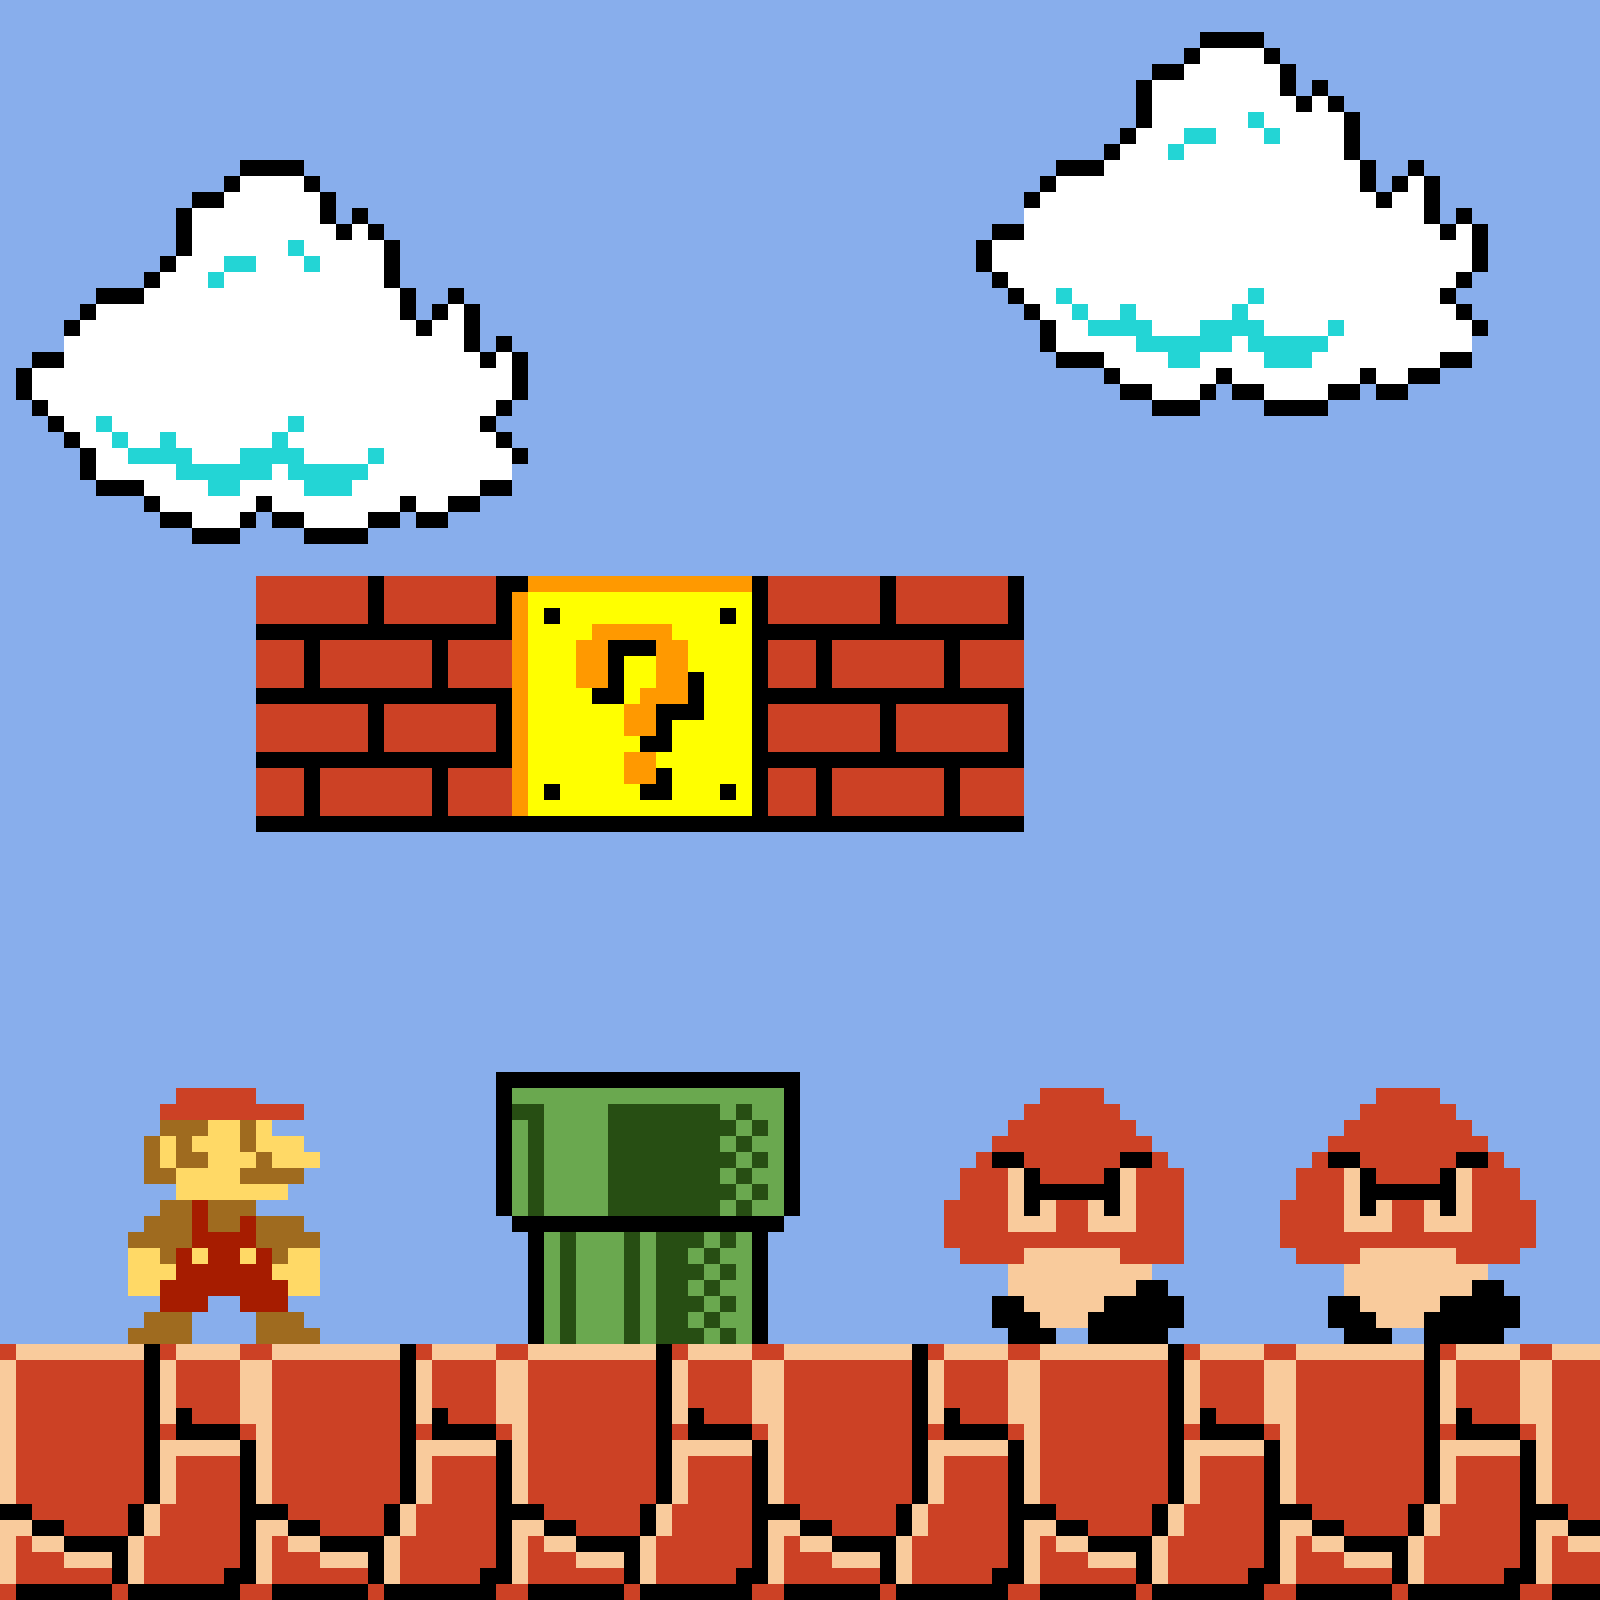 Super Mario World: A Classic Work of Art – Video Games and/as Art